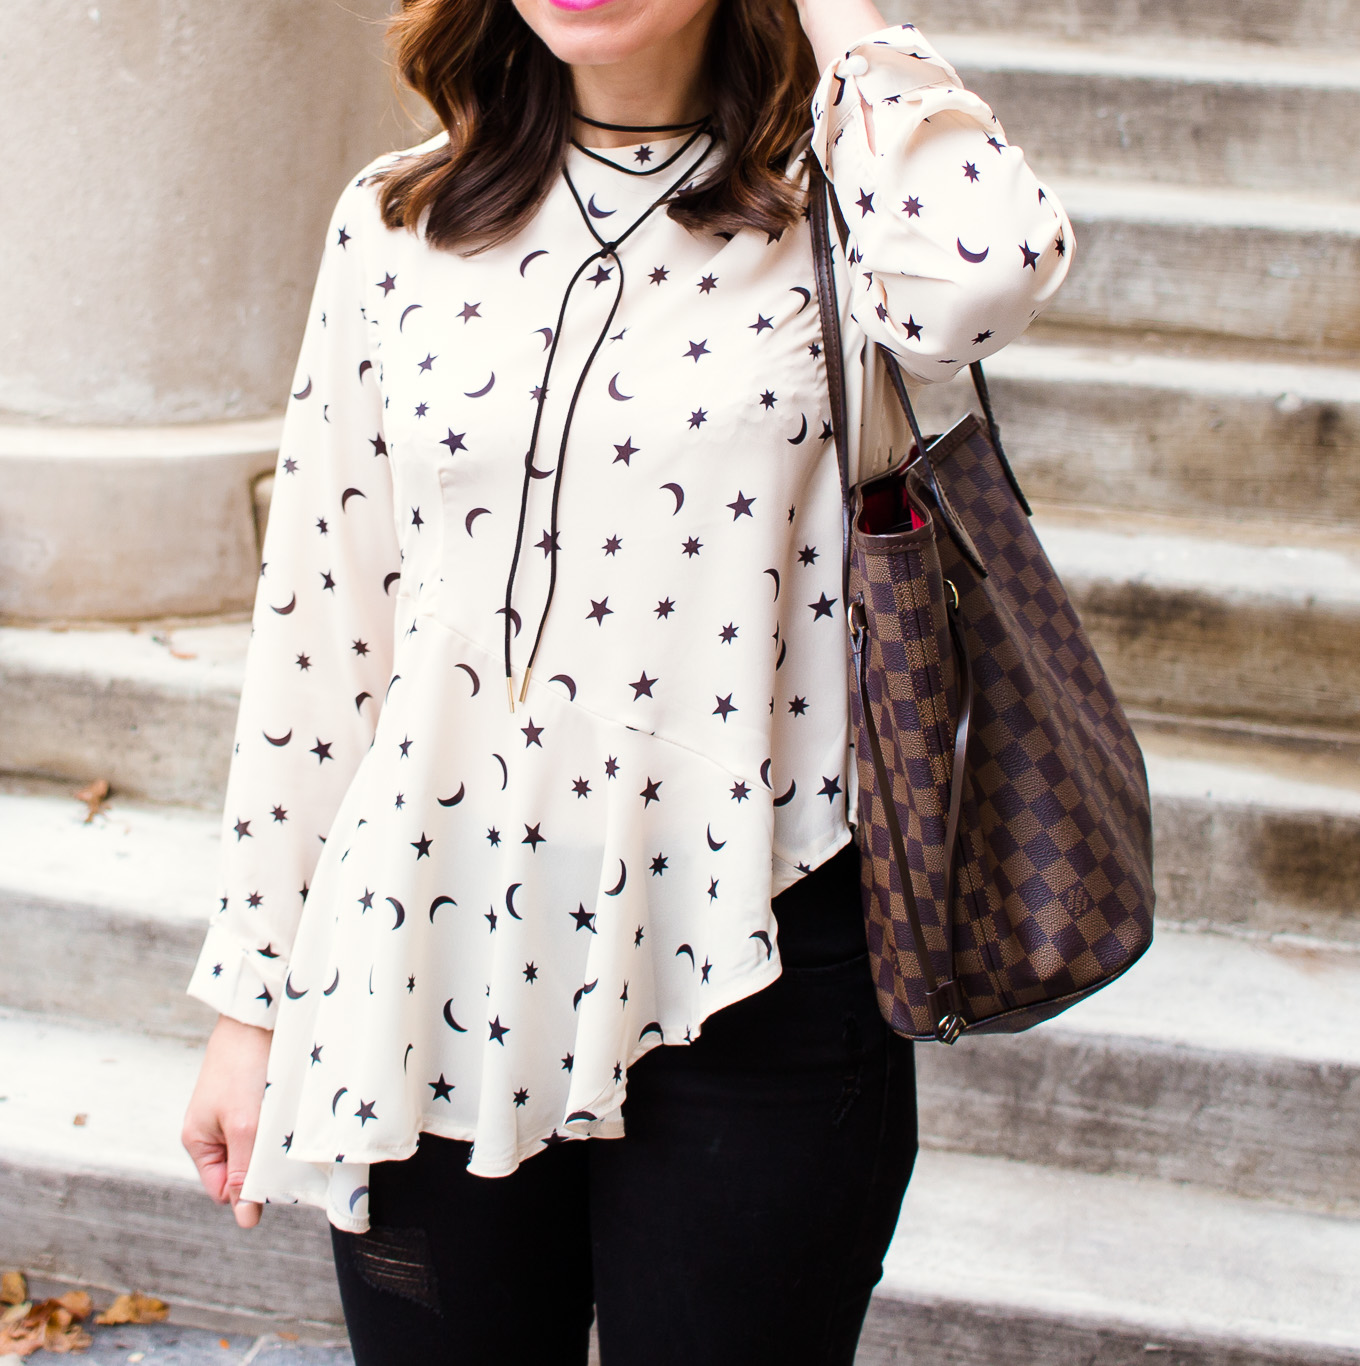 Lifestyle blogger Roxanne of Glass of Glam wearing a star print asymmetrical top, Old Navy denim, and pink combat boots - Asymmetric top with star print by popular Chicago fashion blogger Glass of Glam